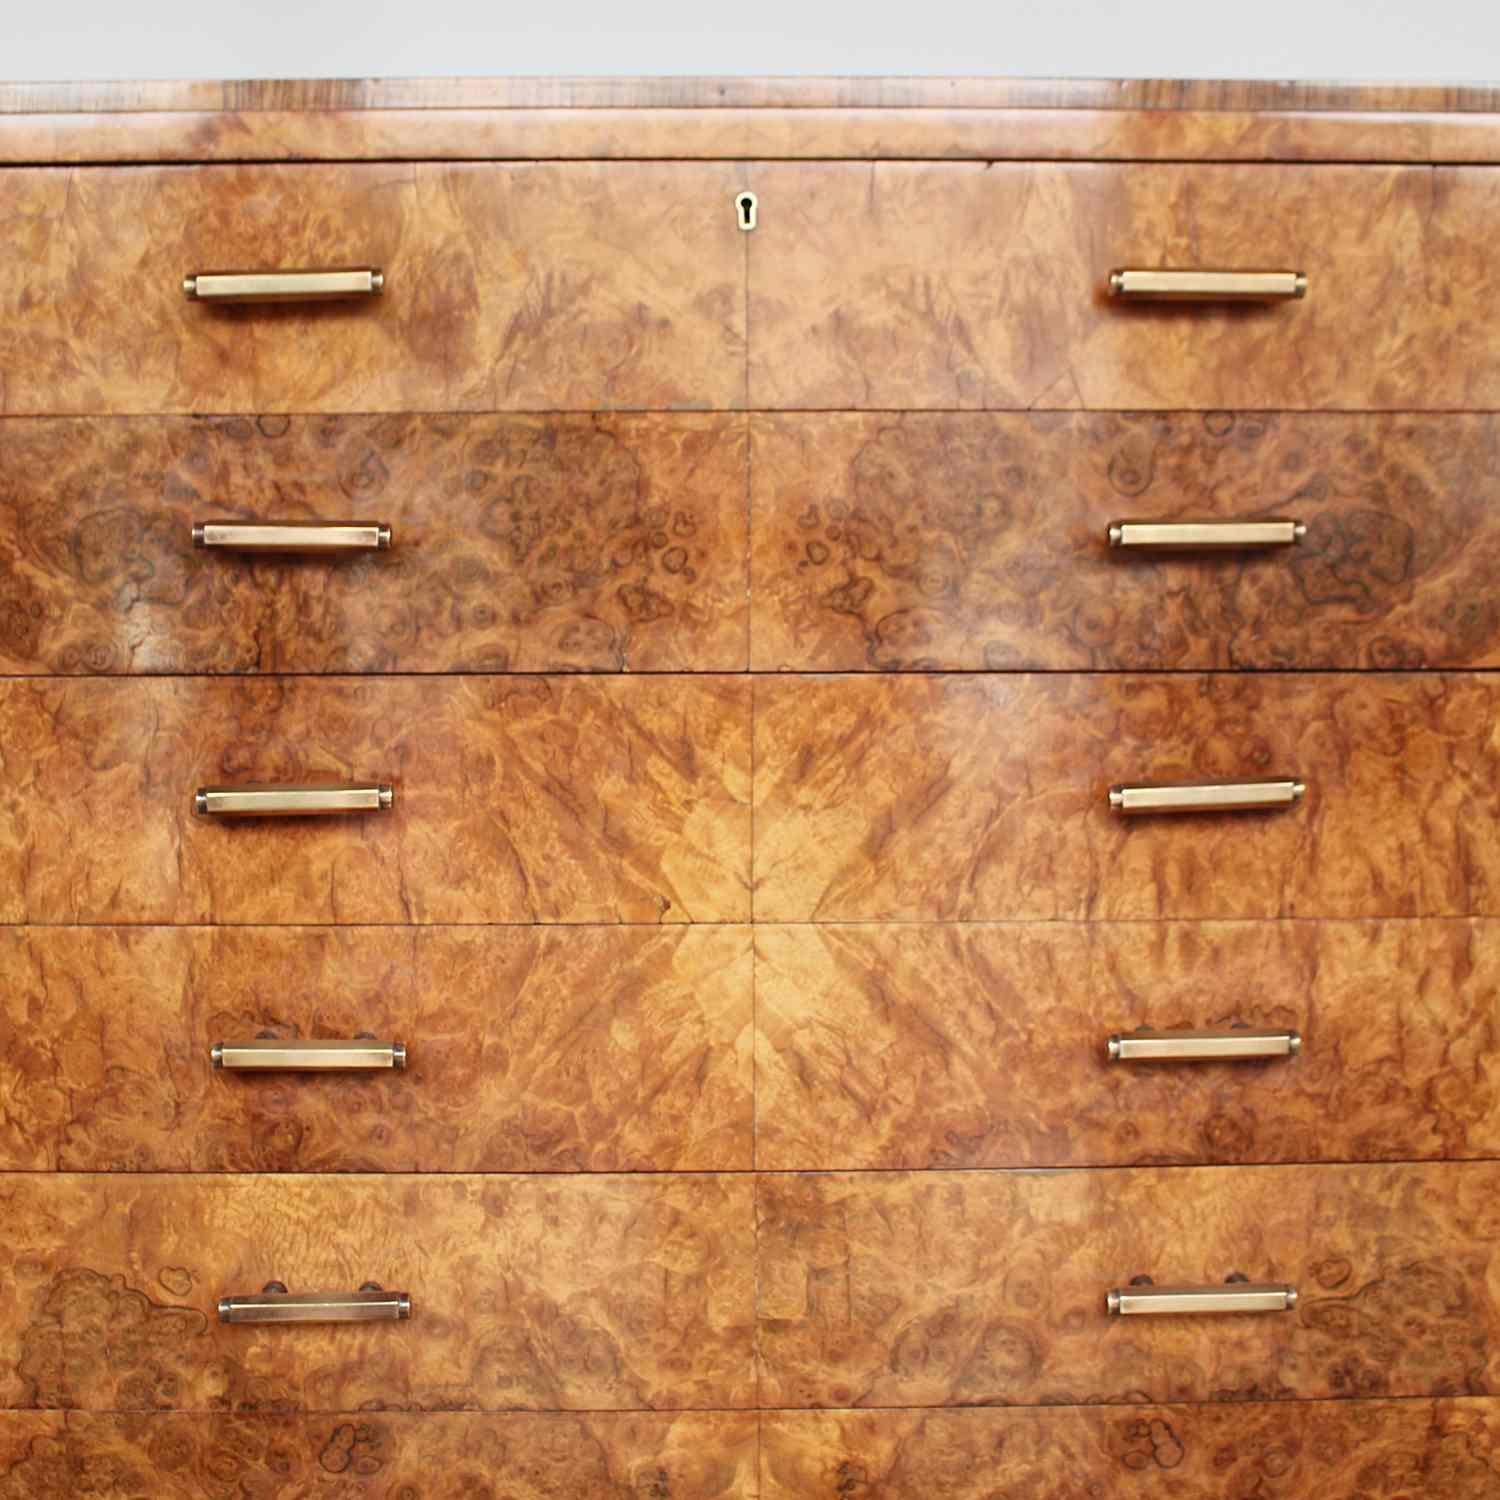 Art Deco Chest of Drawers 1